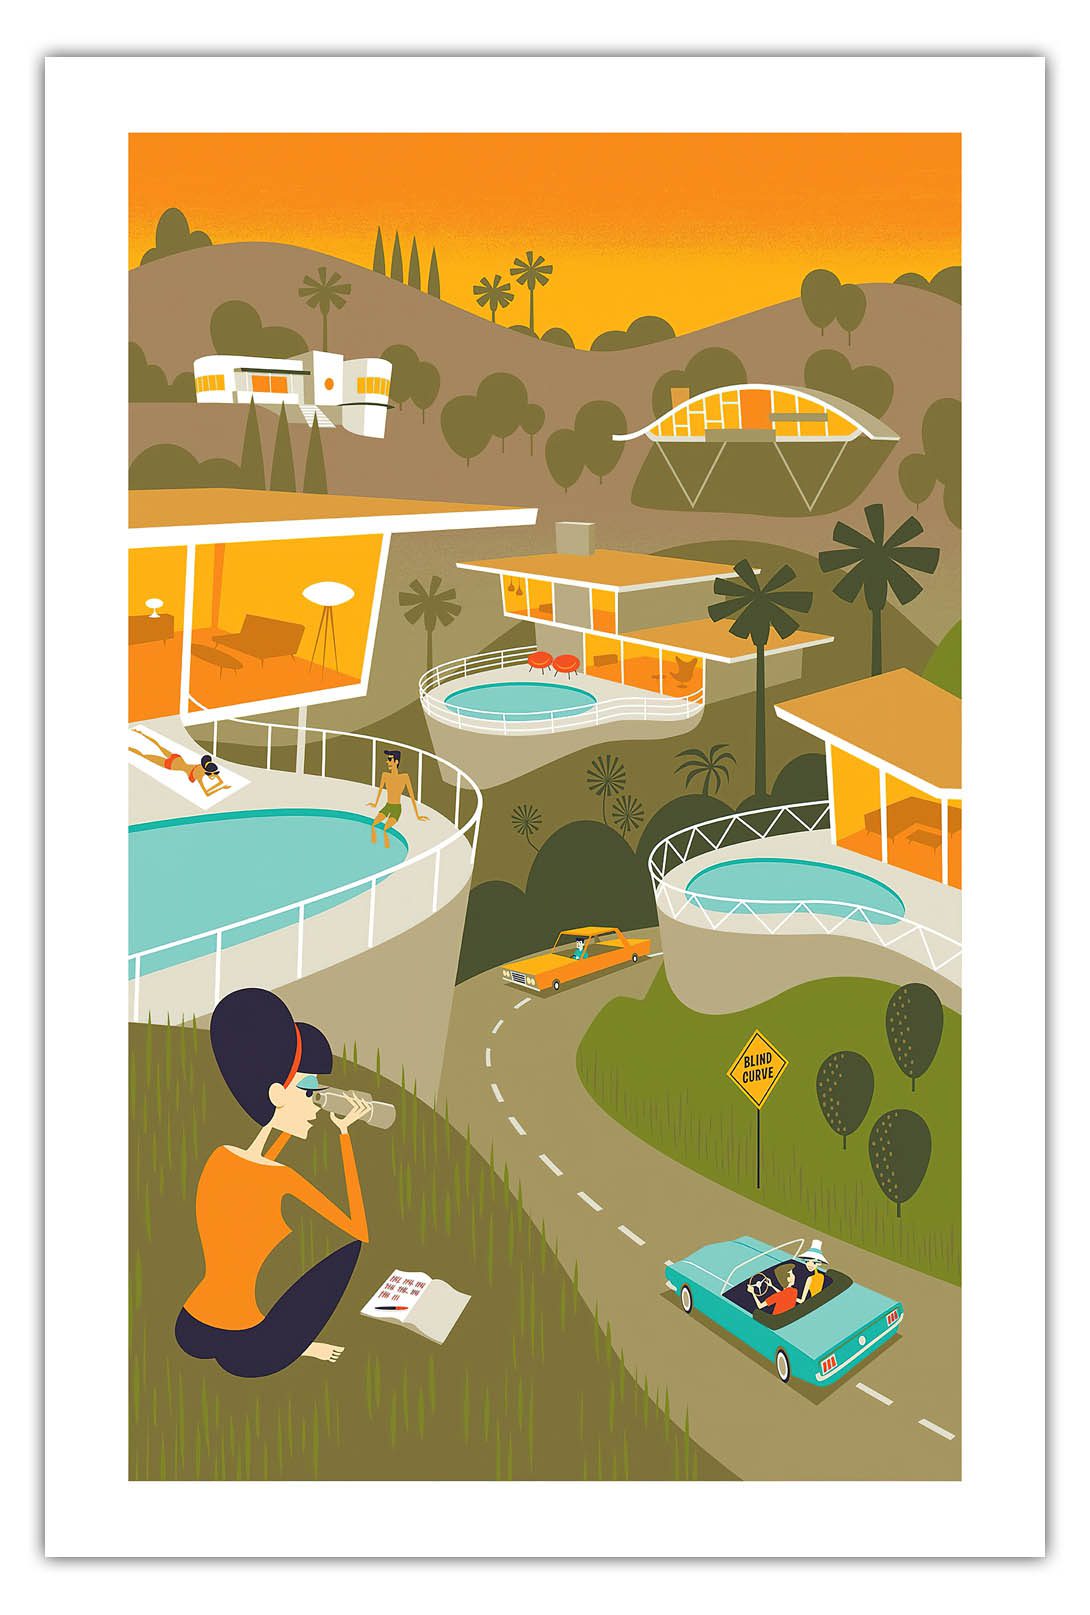 Blind Curve by Shag (Josh Agle) - Unofficial Posters